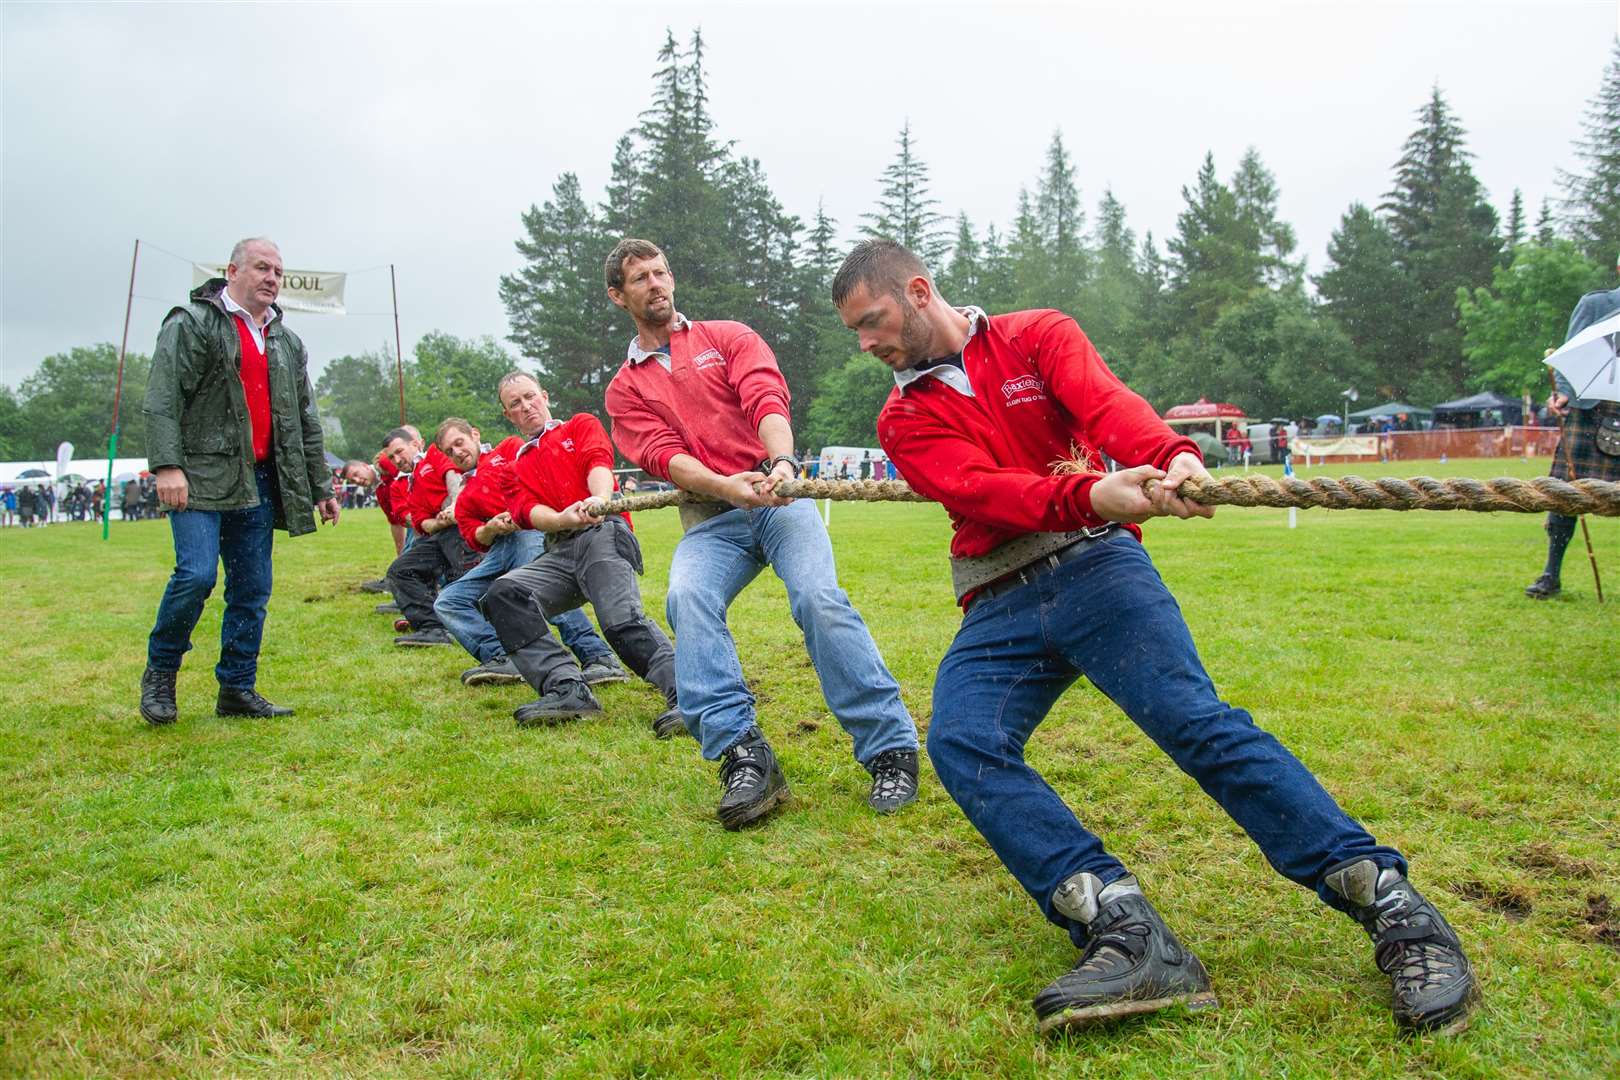 The Elgin Tug of War team competing last summer in Tomintoul.